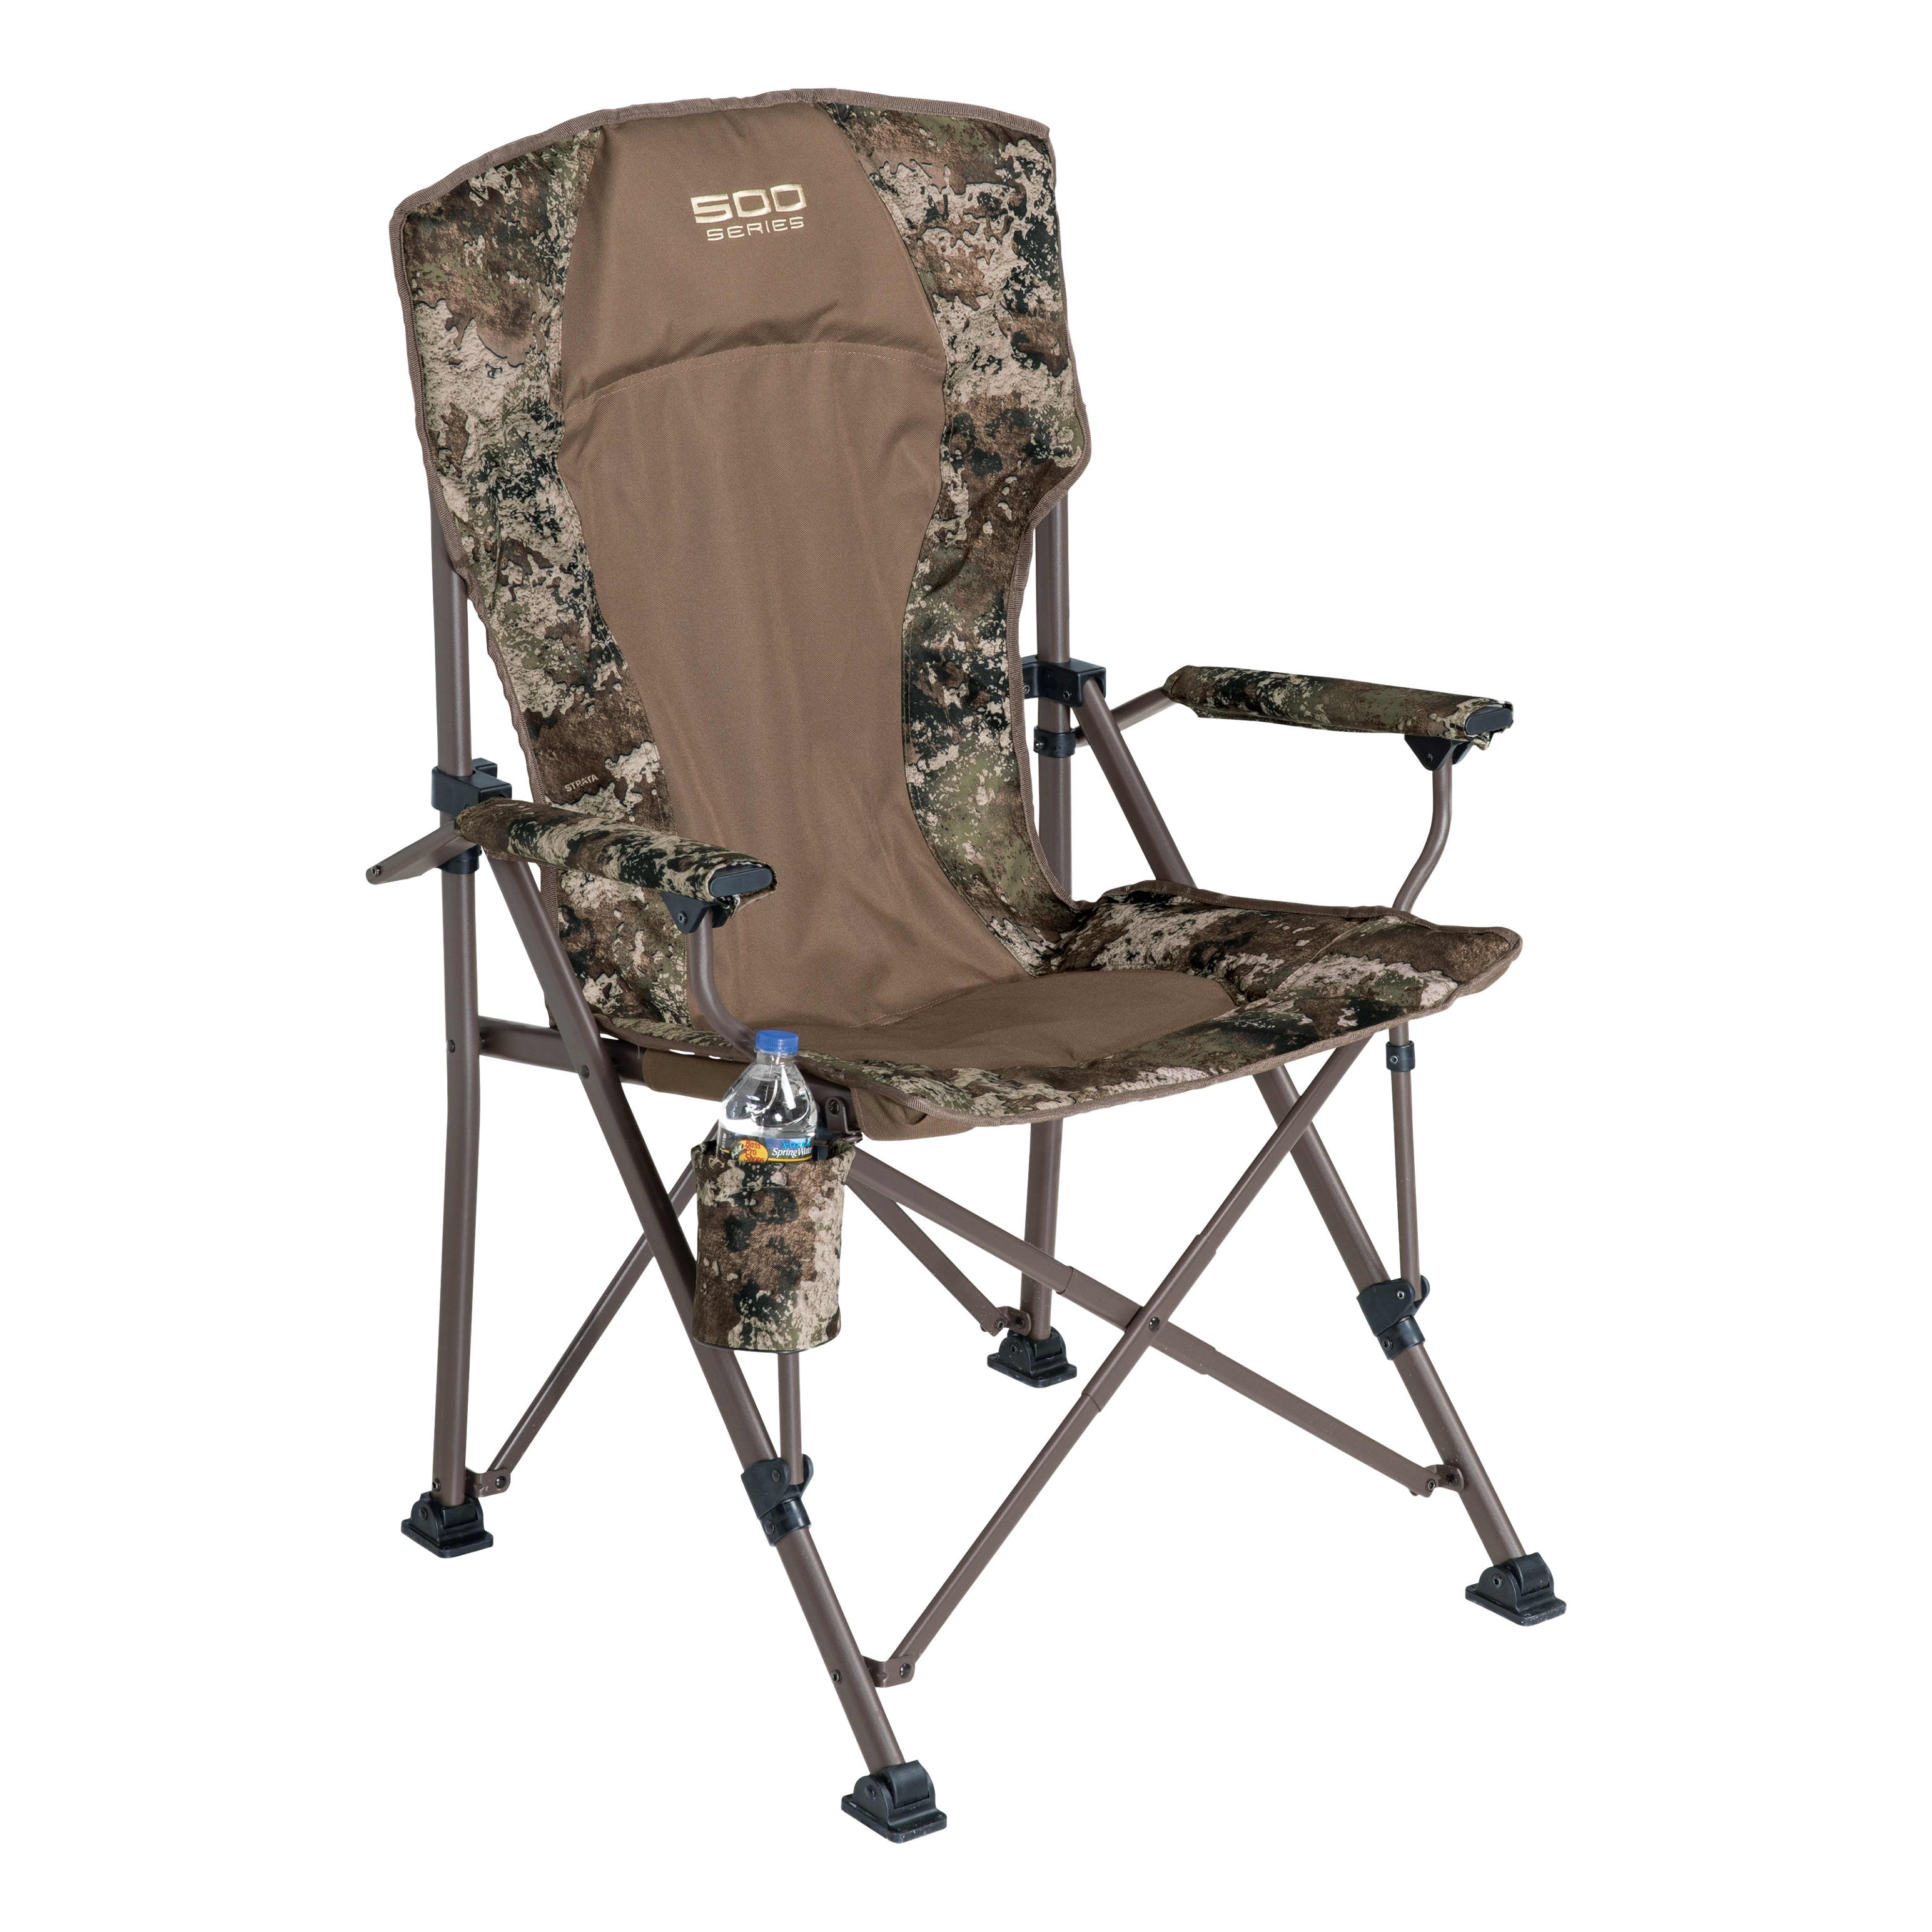 Cabela’s 500 Series Deluxe Folding Hunting Chair